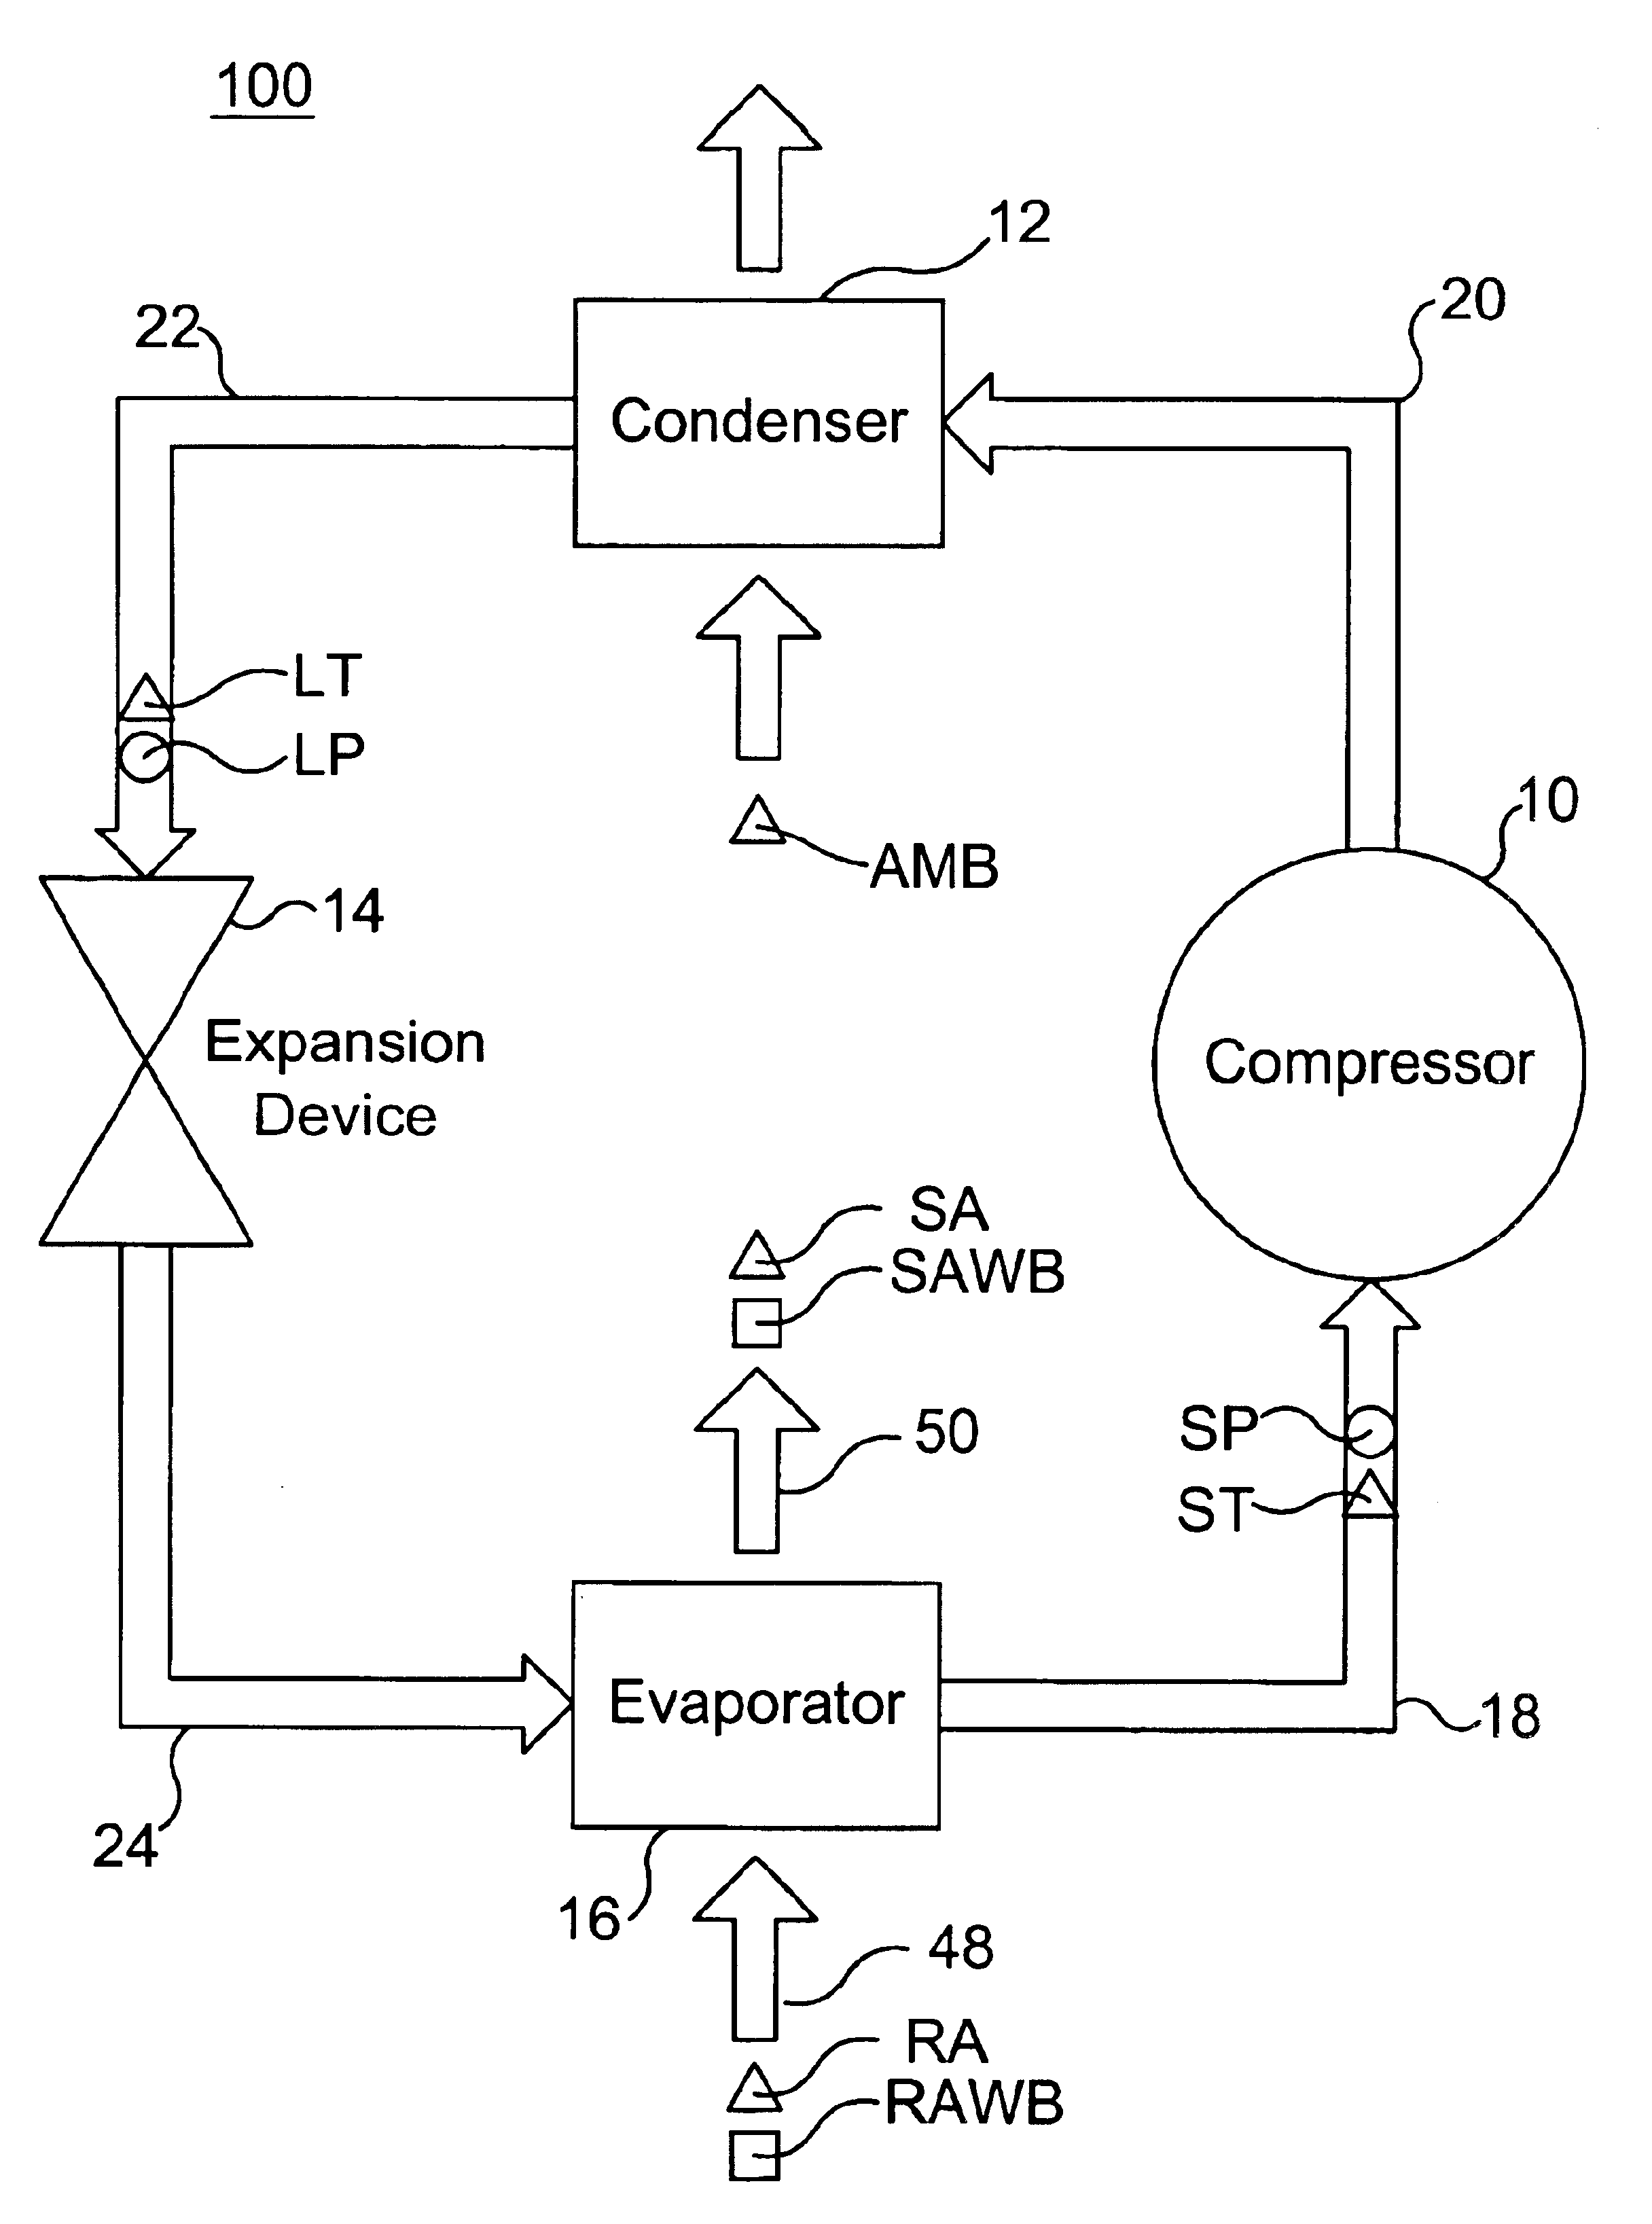 Estimating evaporator airflow in vapor compression cycle cooling equipment